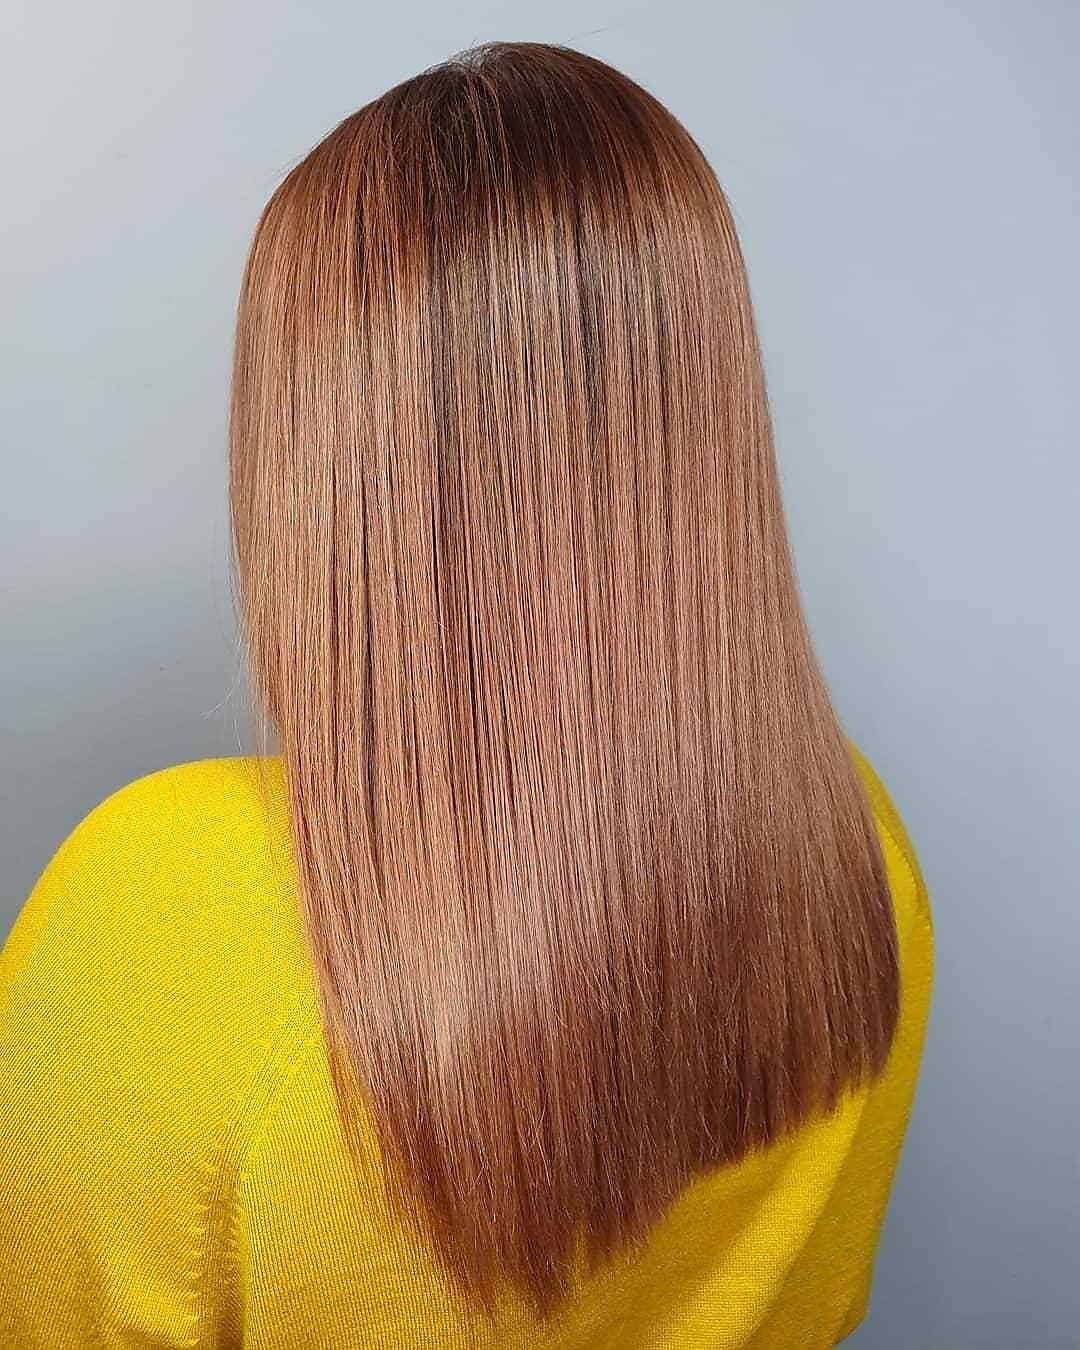 Schwarzkopf Professional - This warmth is to DYE for! 😍
*Formula* 👉 @paulospitsilidis toned previously blonde hair with #IGORAVIBRANCE: Roots – 6-12 + 8-11 + 8-19 with 3% Developer. Lengths – 9.5 - 49...